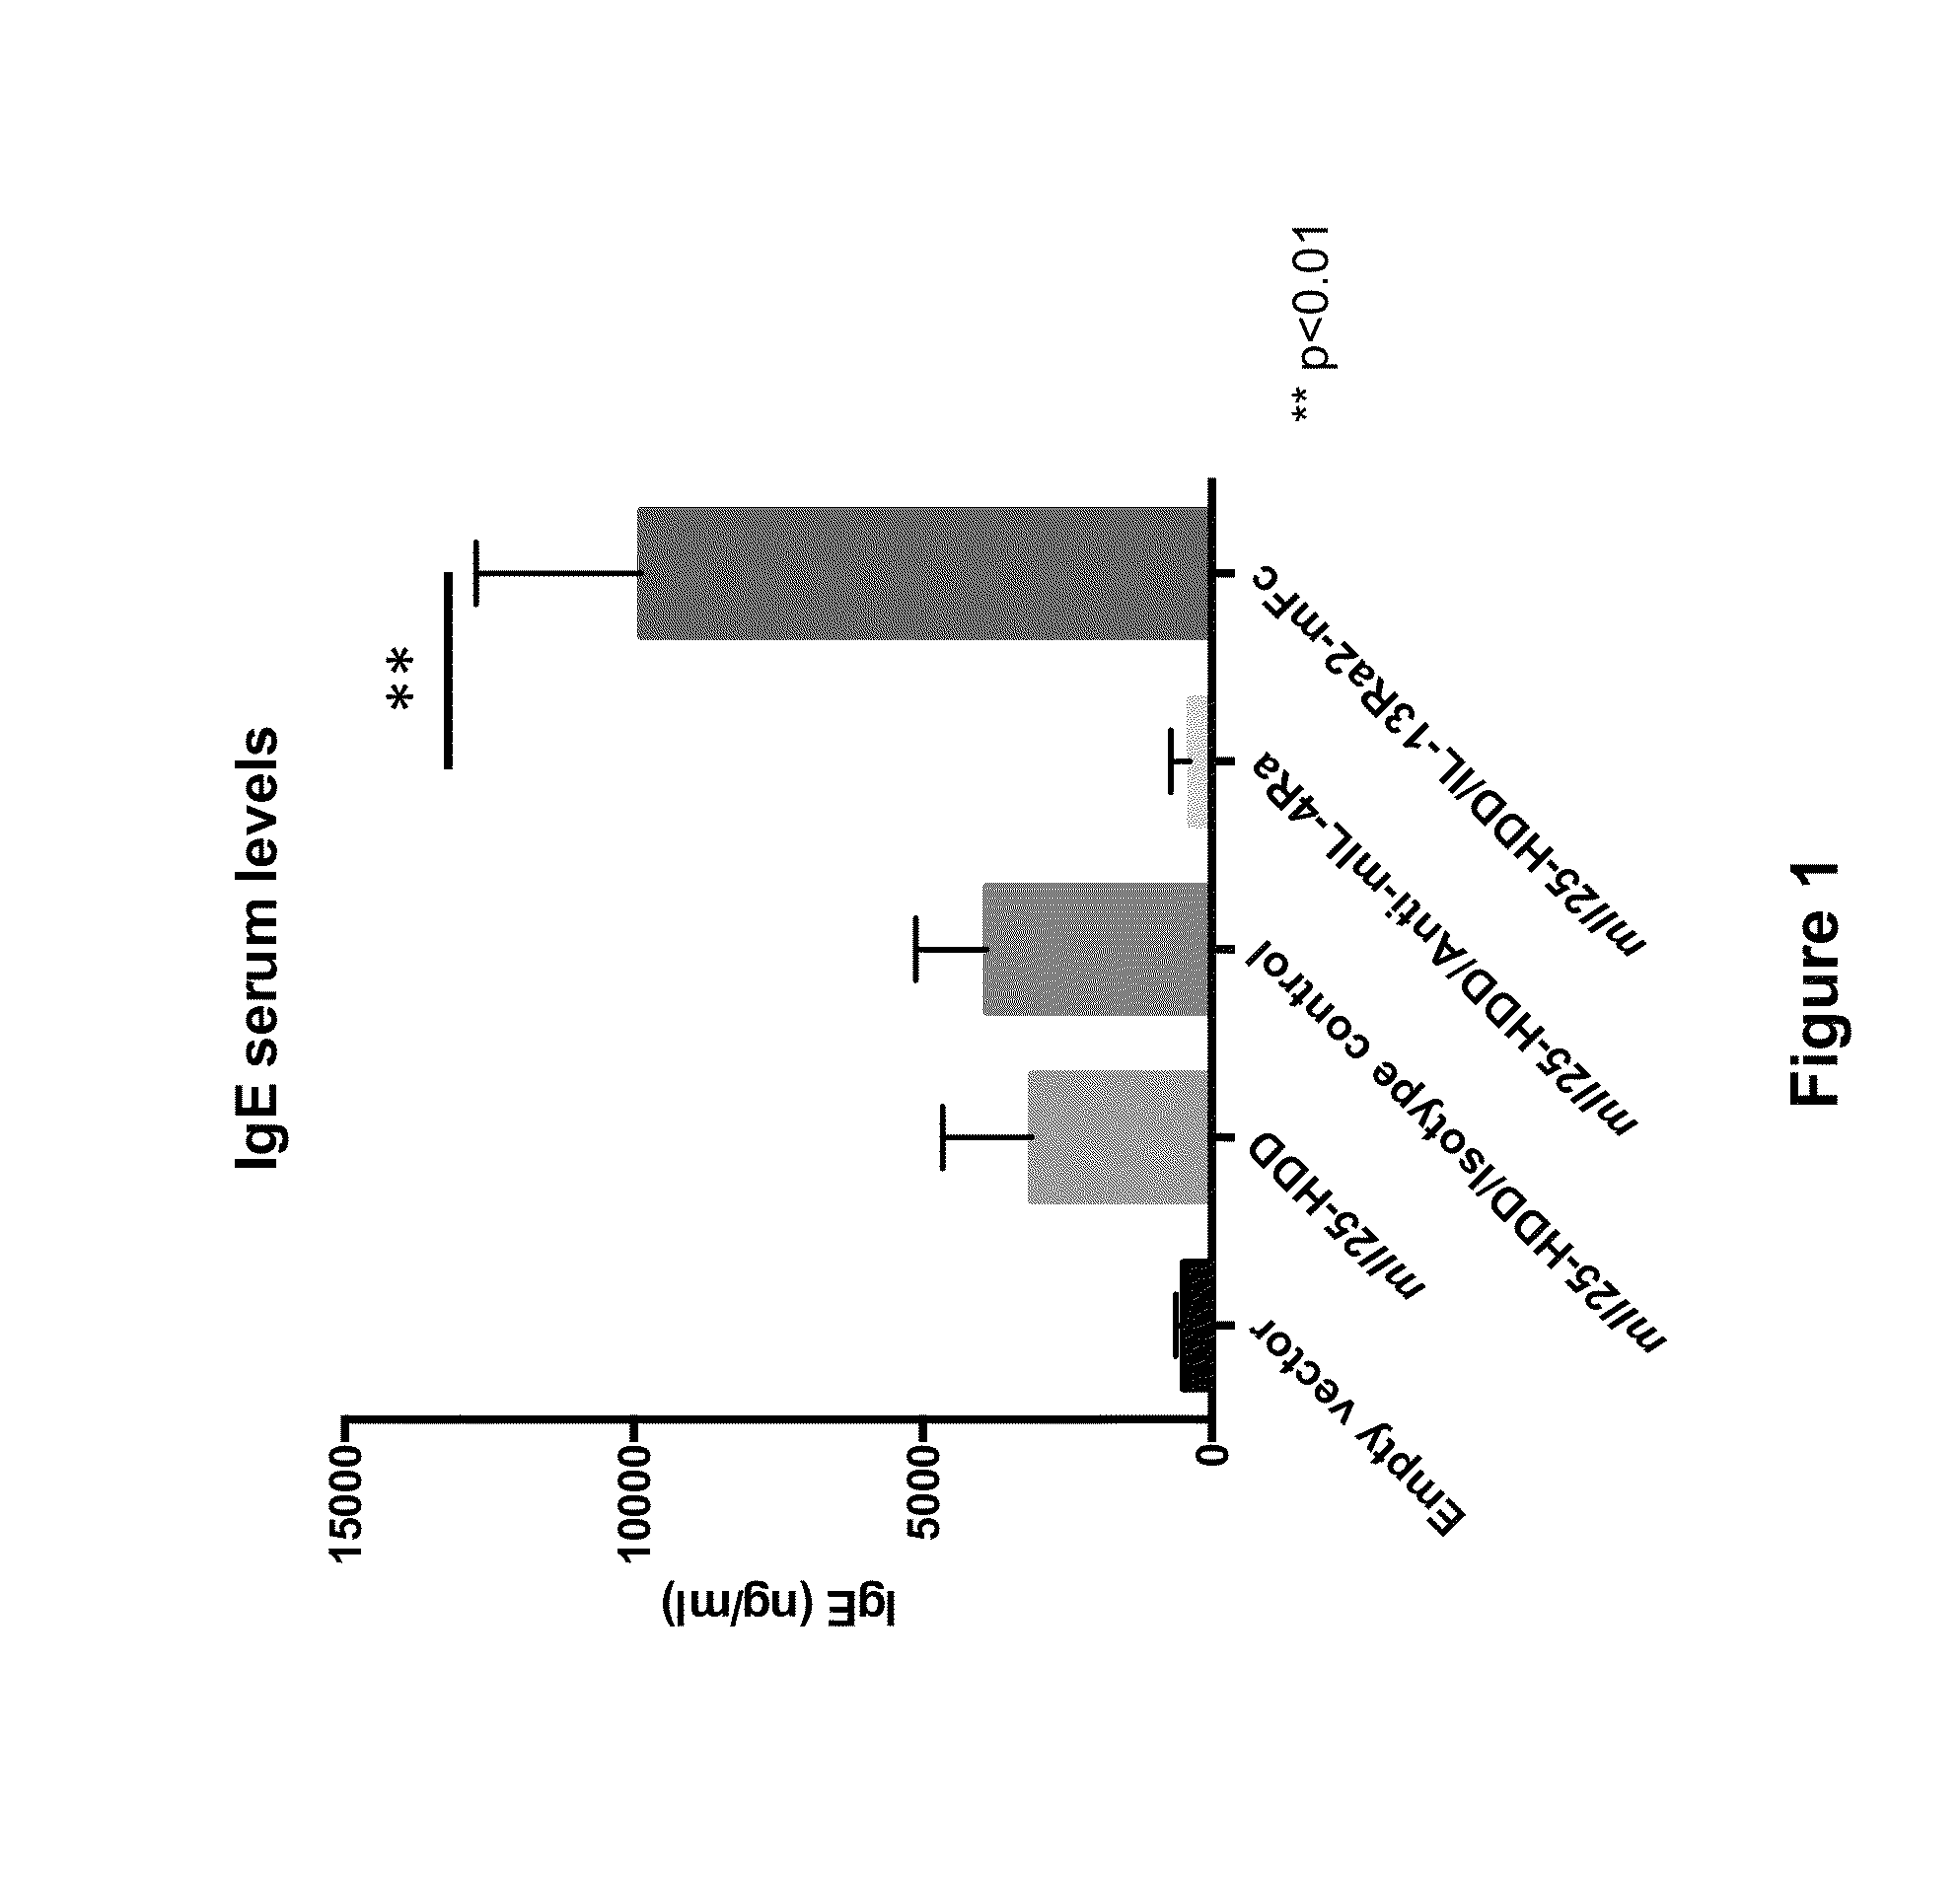 Methods for treating eosinophilic esophagitis by administering an IL-4R inhibitor